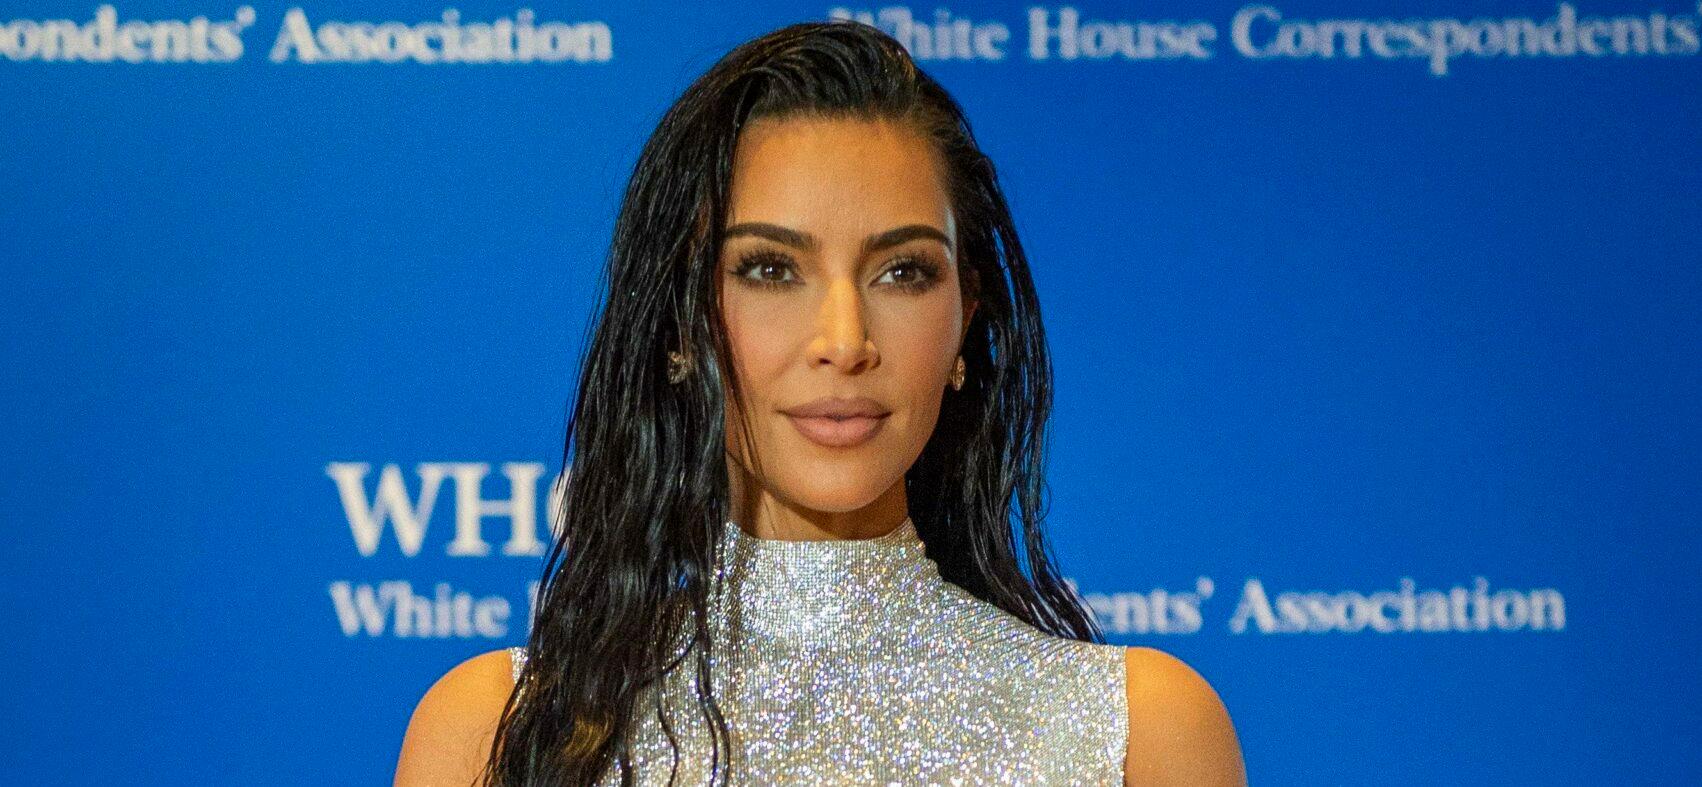 Kim Kardashian Claims She Could Quit Reality TV To Become A ‘Full-Time’ Lawyer